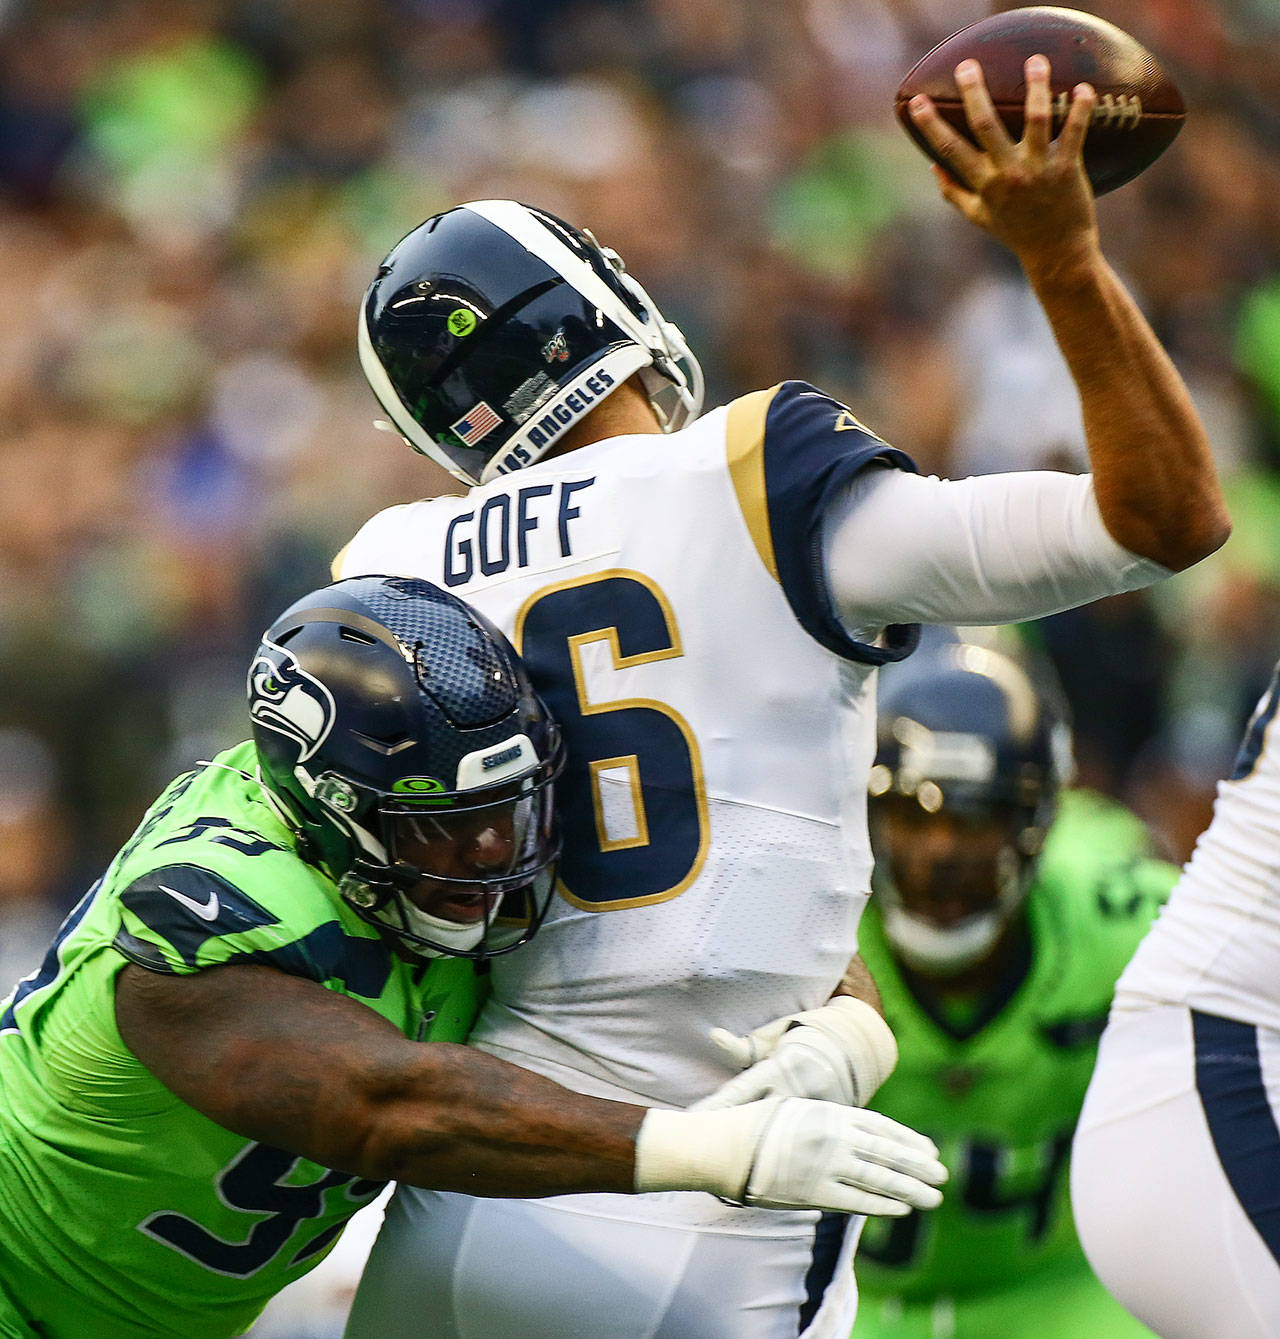 Seattle’s Quinton Jefferson (left) hits L.A. Rams quarterback Jared Goff as he attempts to throw a pass during the Seahawks’ 30-29 win over the Rams on Thursday at CenturyLink Field in Seattle.(Kevin Clark / The Herald)